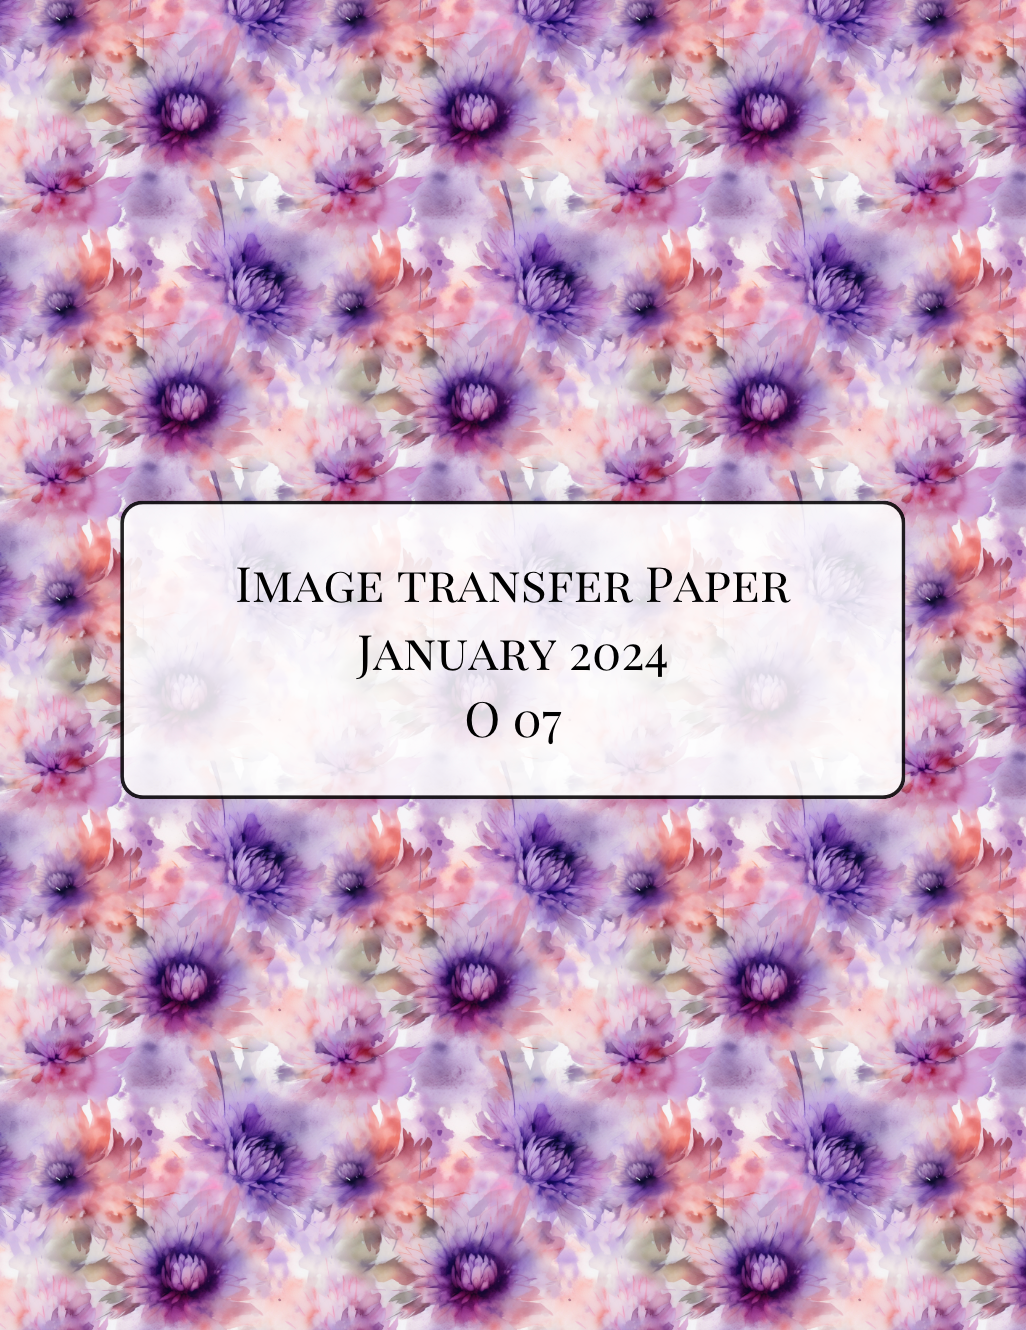 O07 Transfer Paper - January Launch